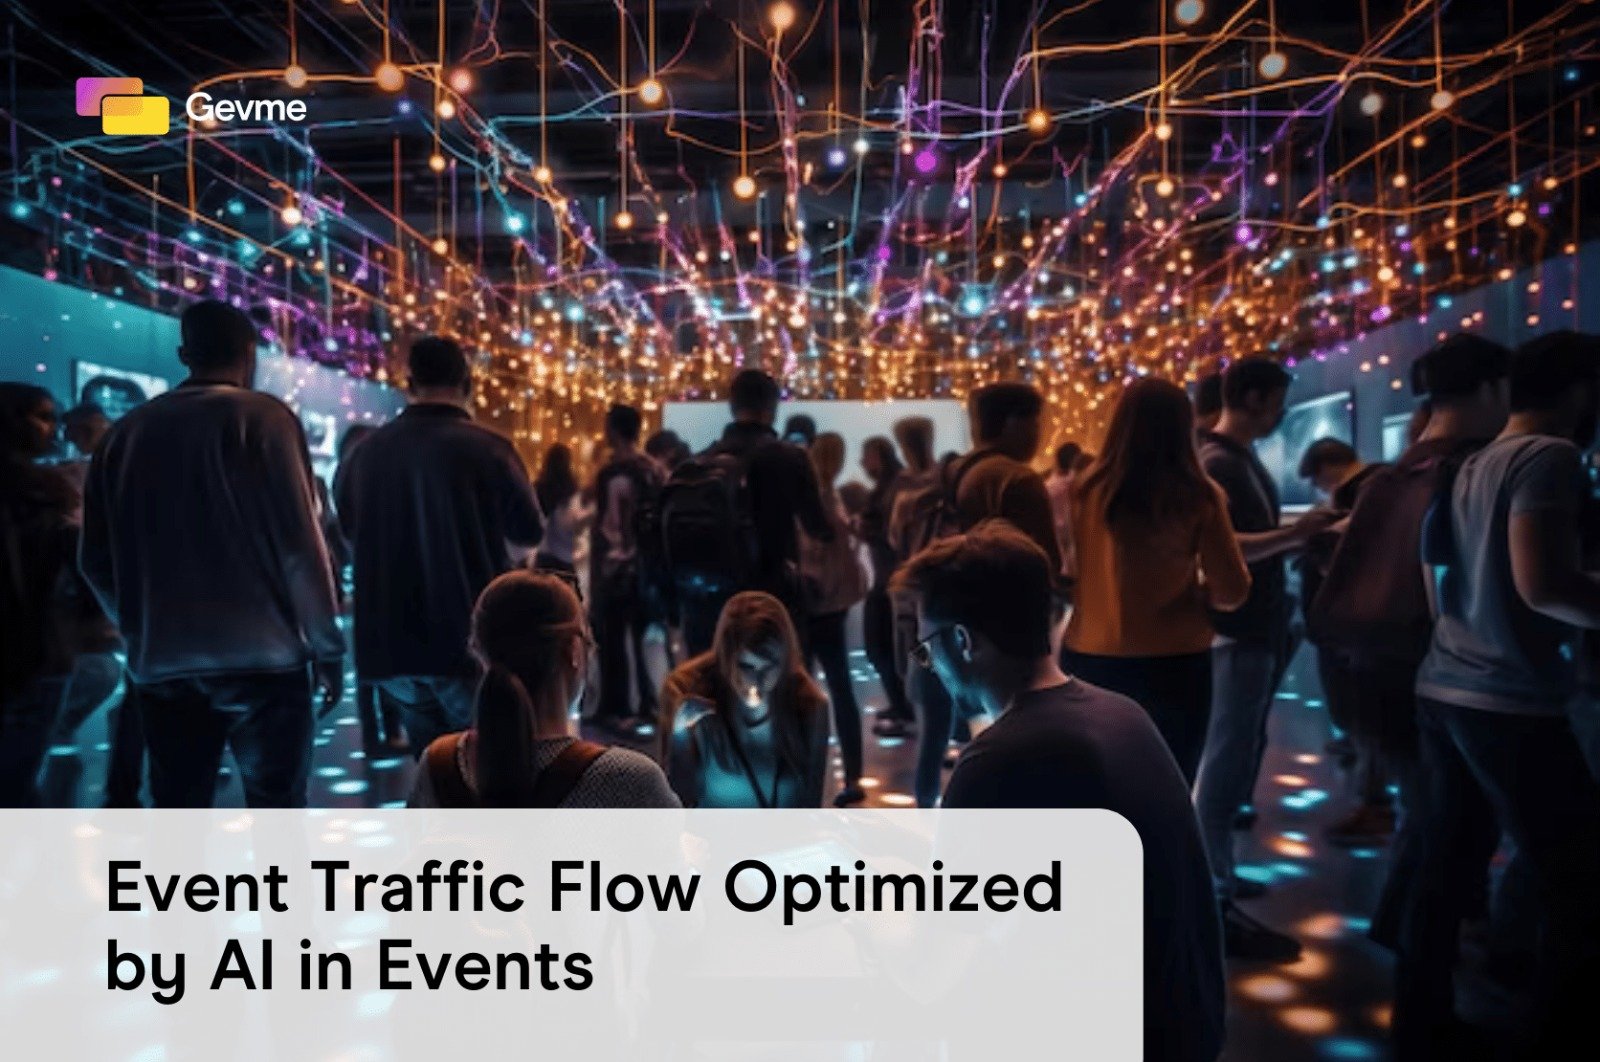 Event Traffic Flow Optimized by AI in Events